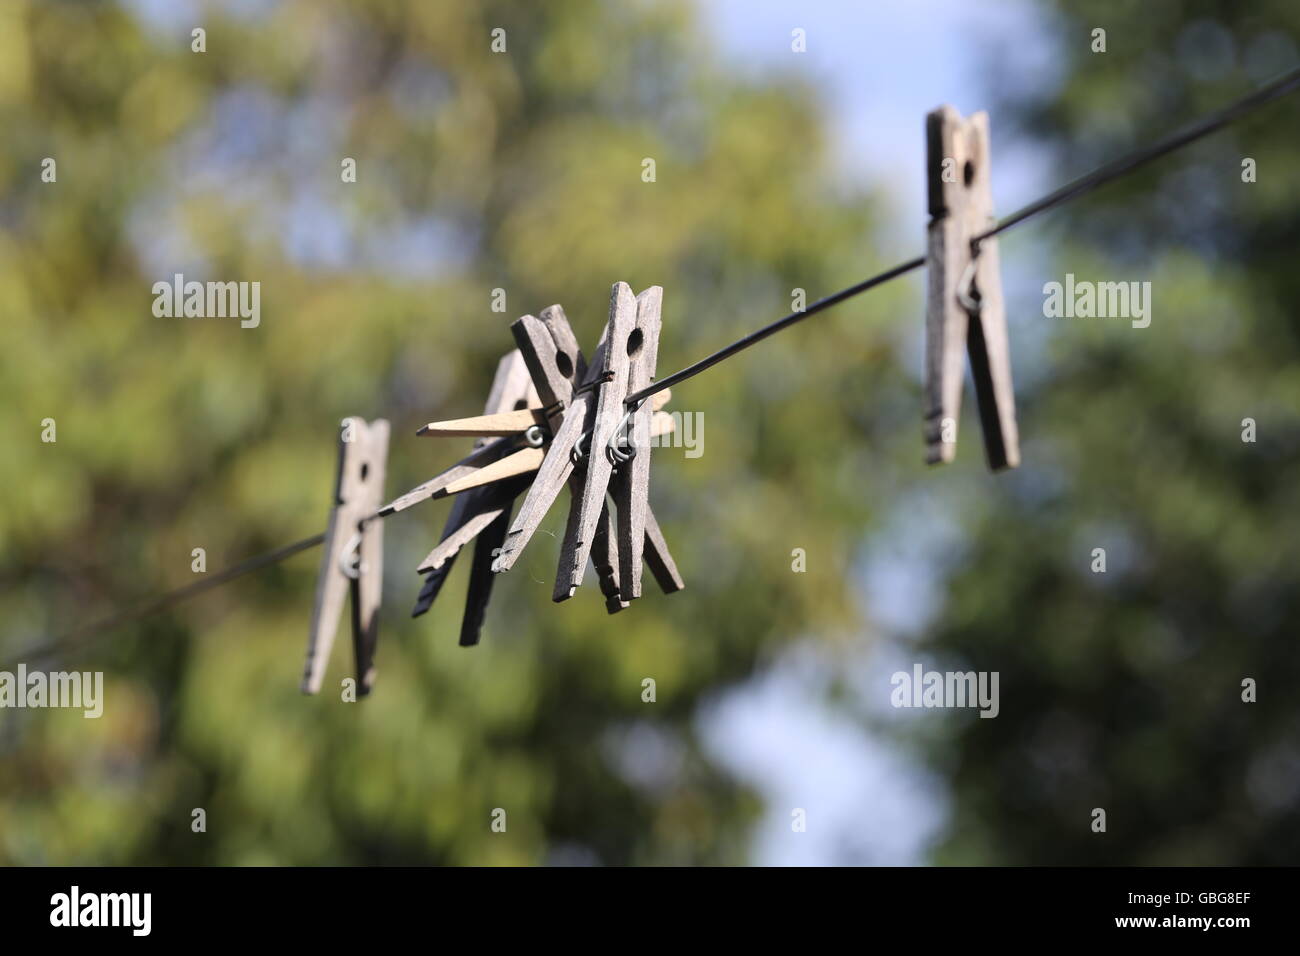 Wooden Clothespins Hanged on a Clothesline. Group of old wooden laundry sticks hanged on an iron clothe line after long time with no use. Clothesline Stock Photo